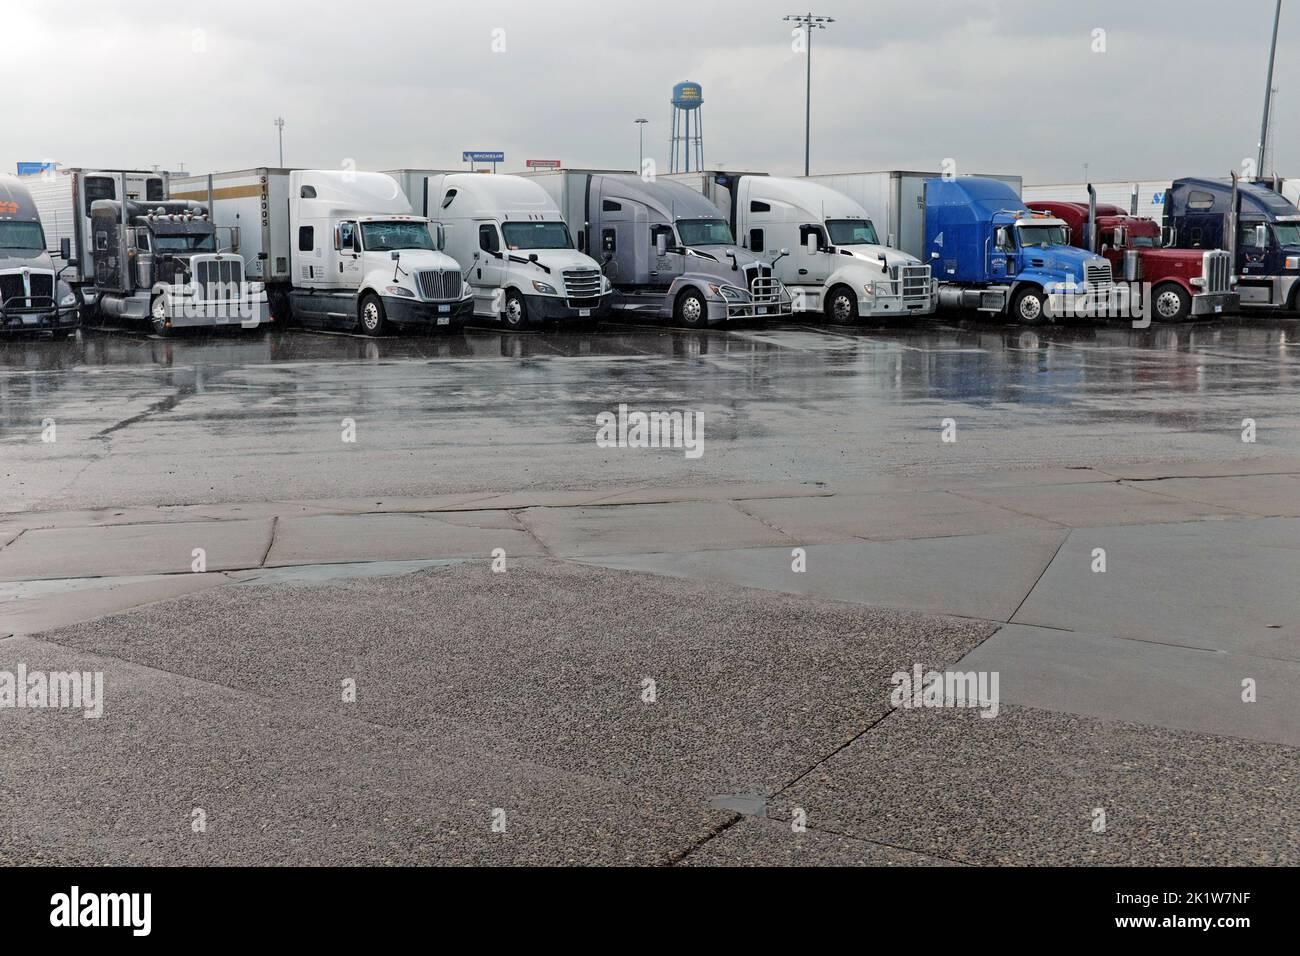 A row of semi trucks parked during a rain storm at the World's Largest Truck Stop, Iowa 80, in Walcott, Iowa, USA. Stock Photo